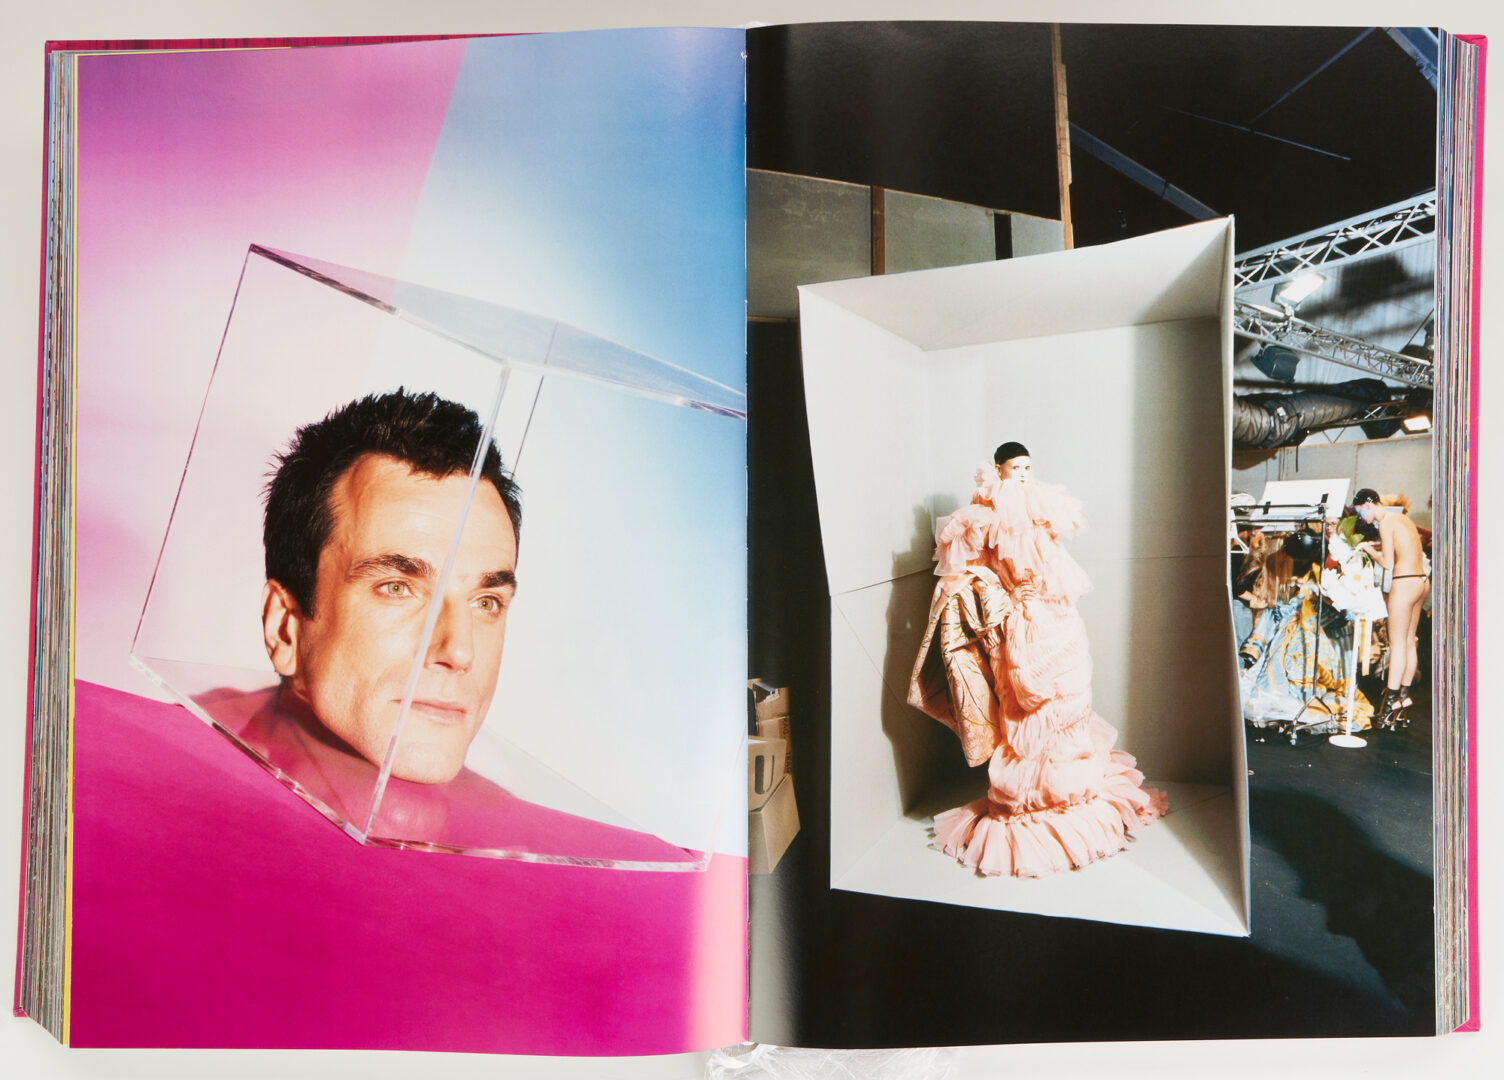 Lot 547: Signed LaChapelle Artists & Prostitutes, Ltd. Ed. + Houseago, What Went Down, 2 items